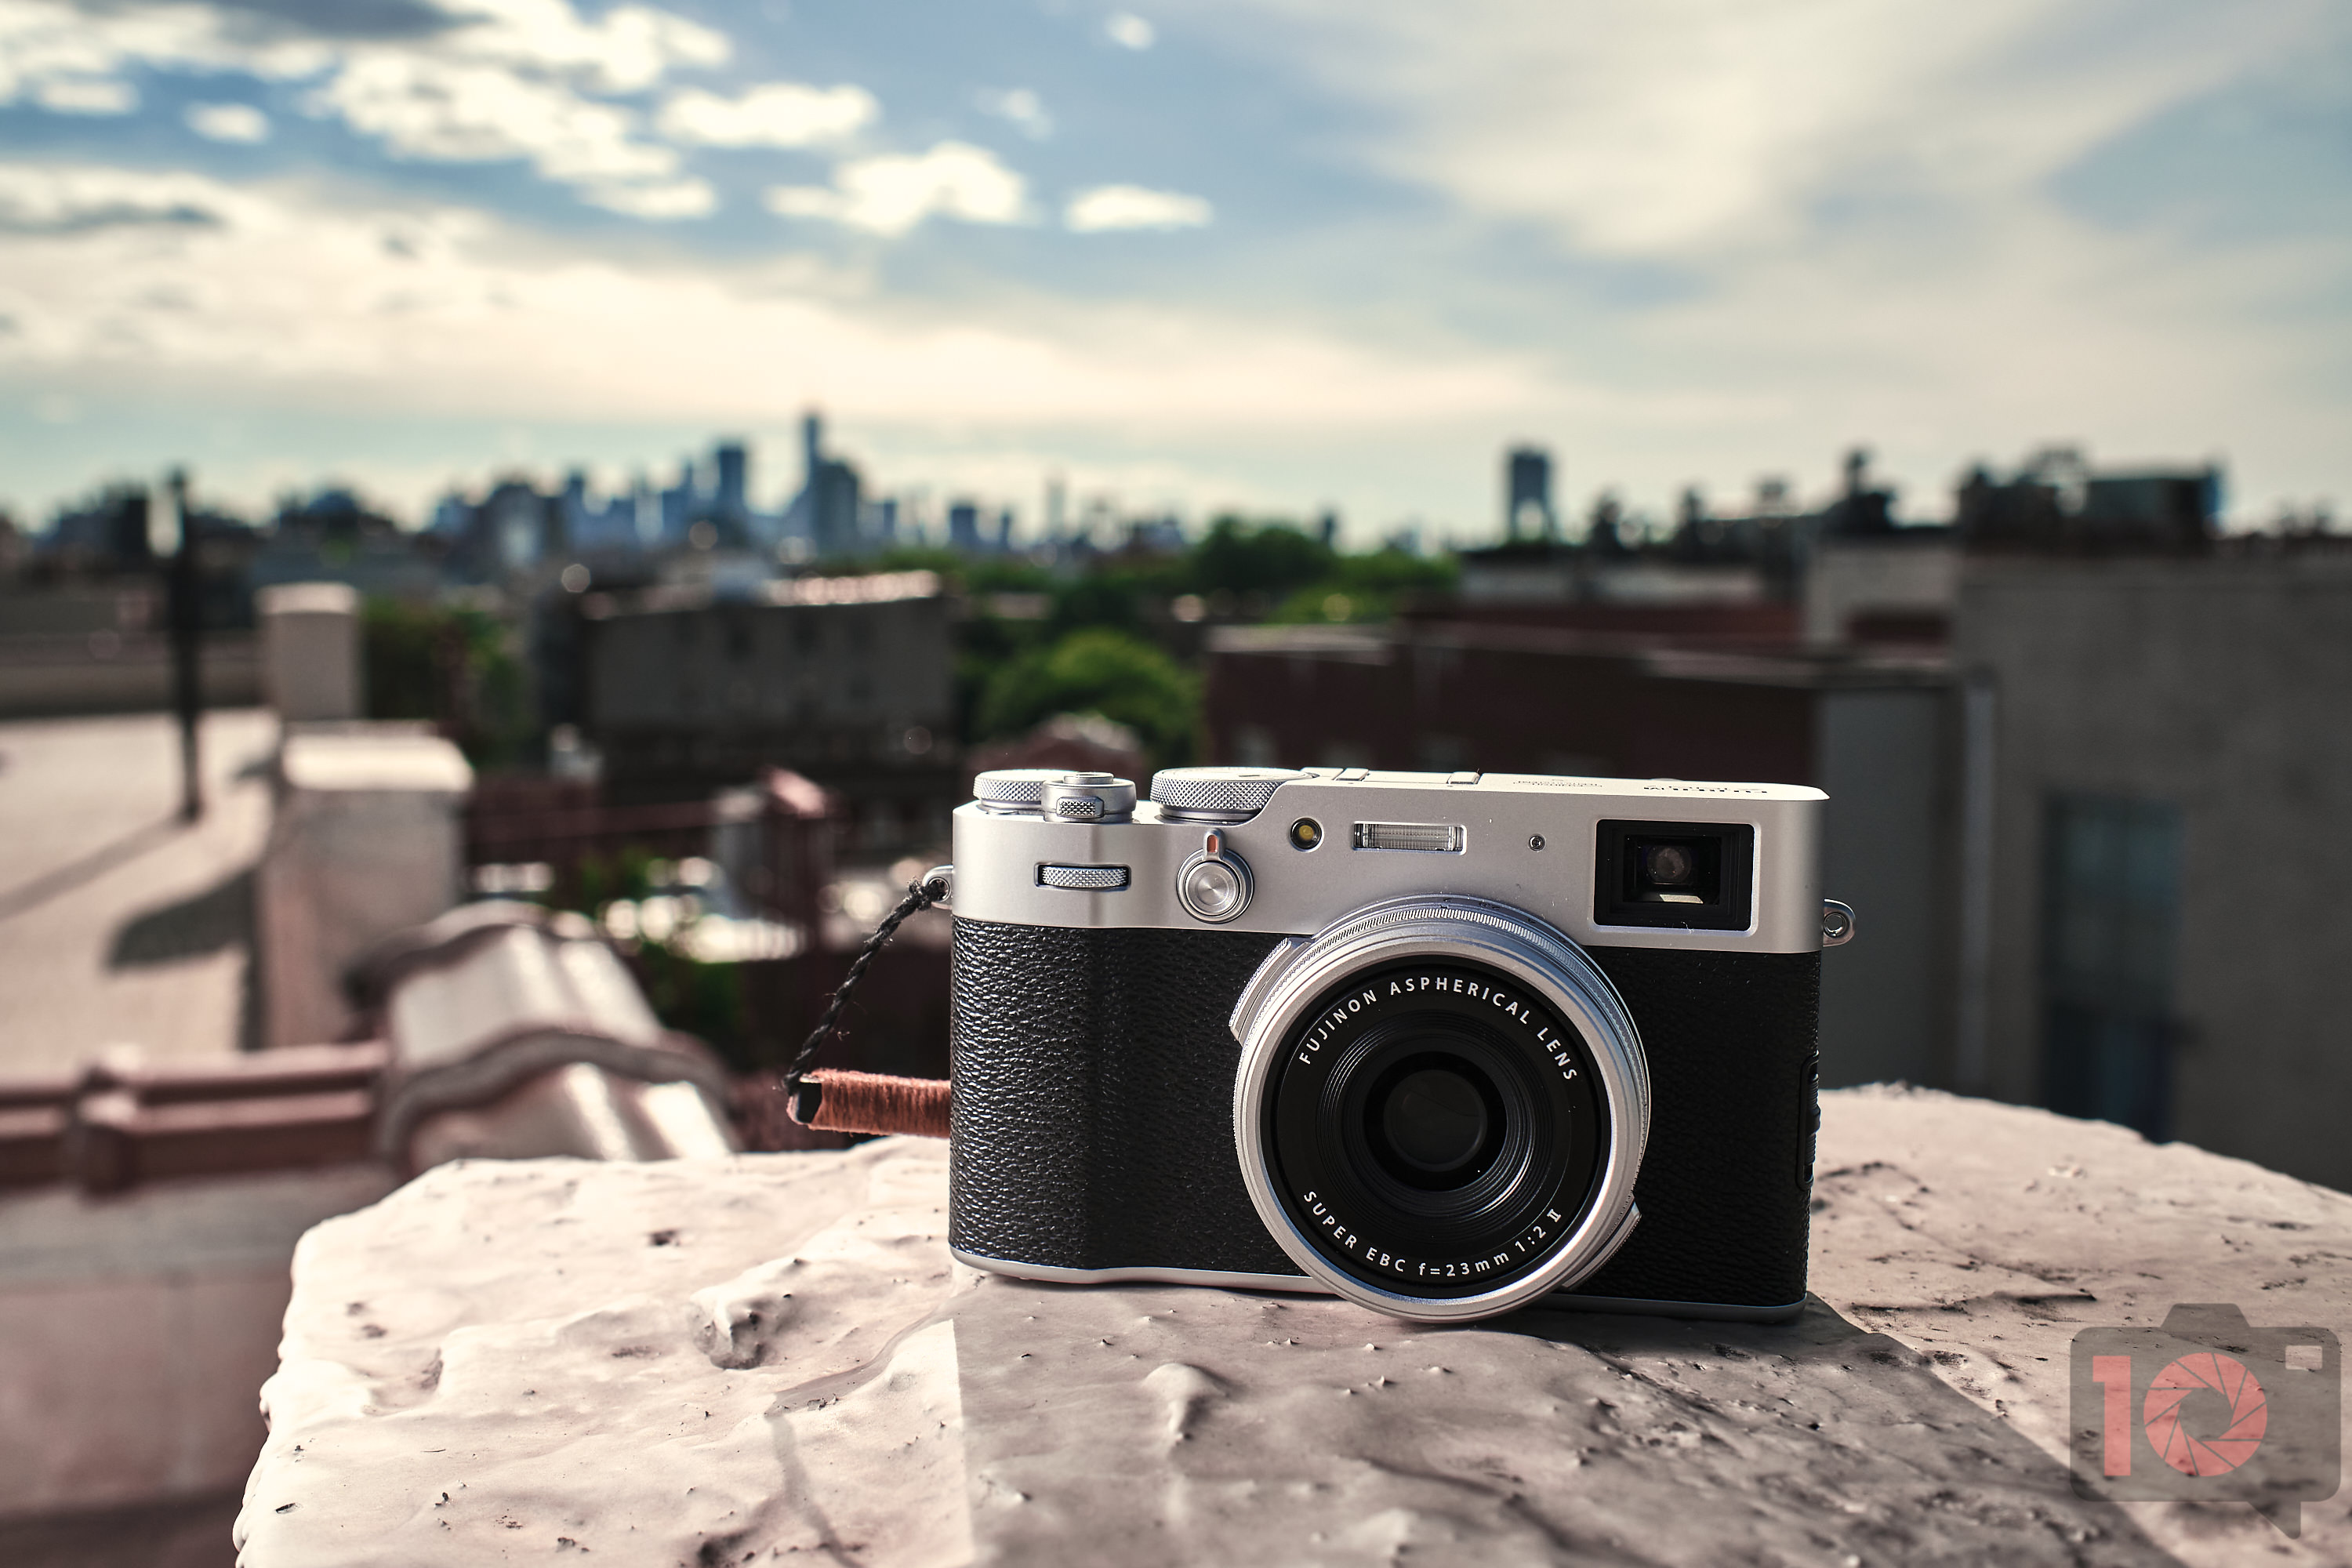 How the Next Fujifilm X100 Camera Can Become Even Better